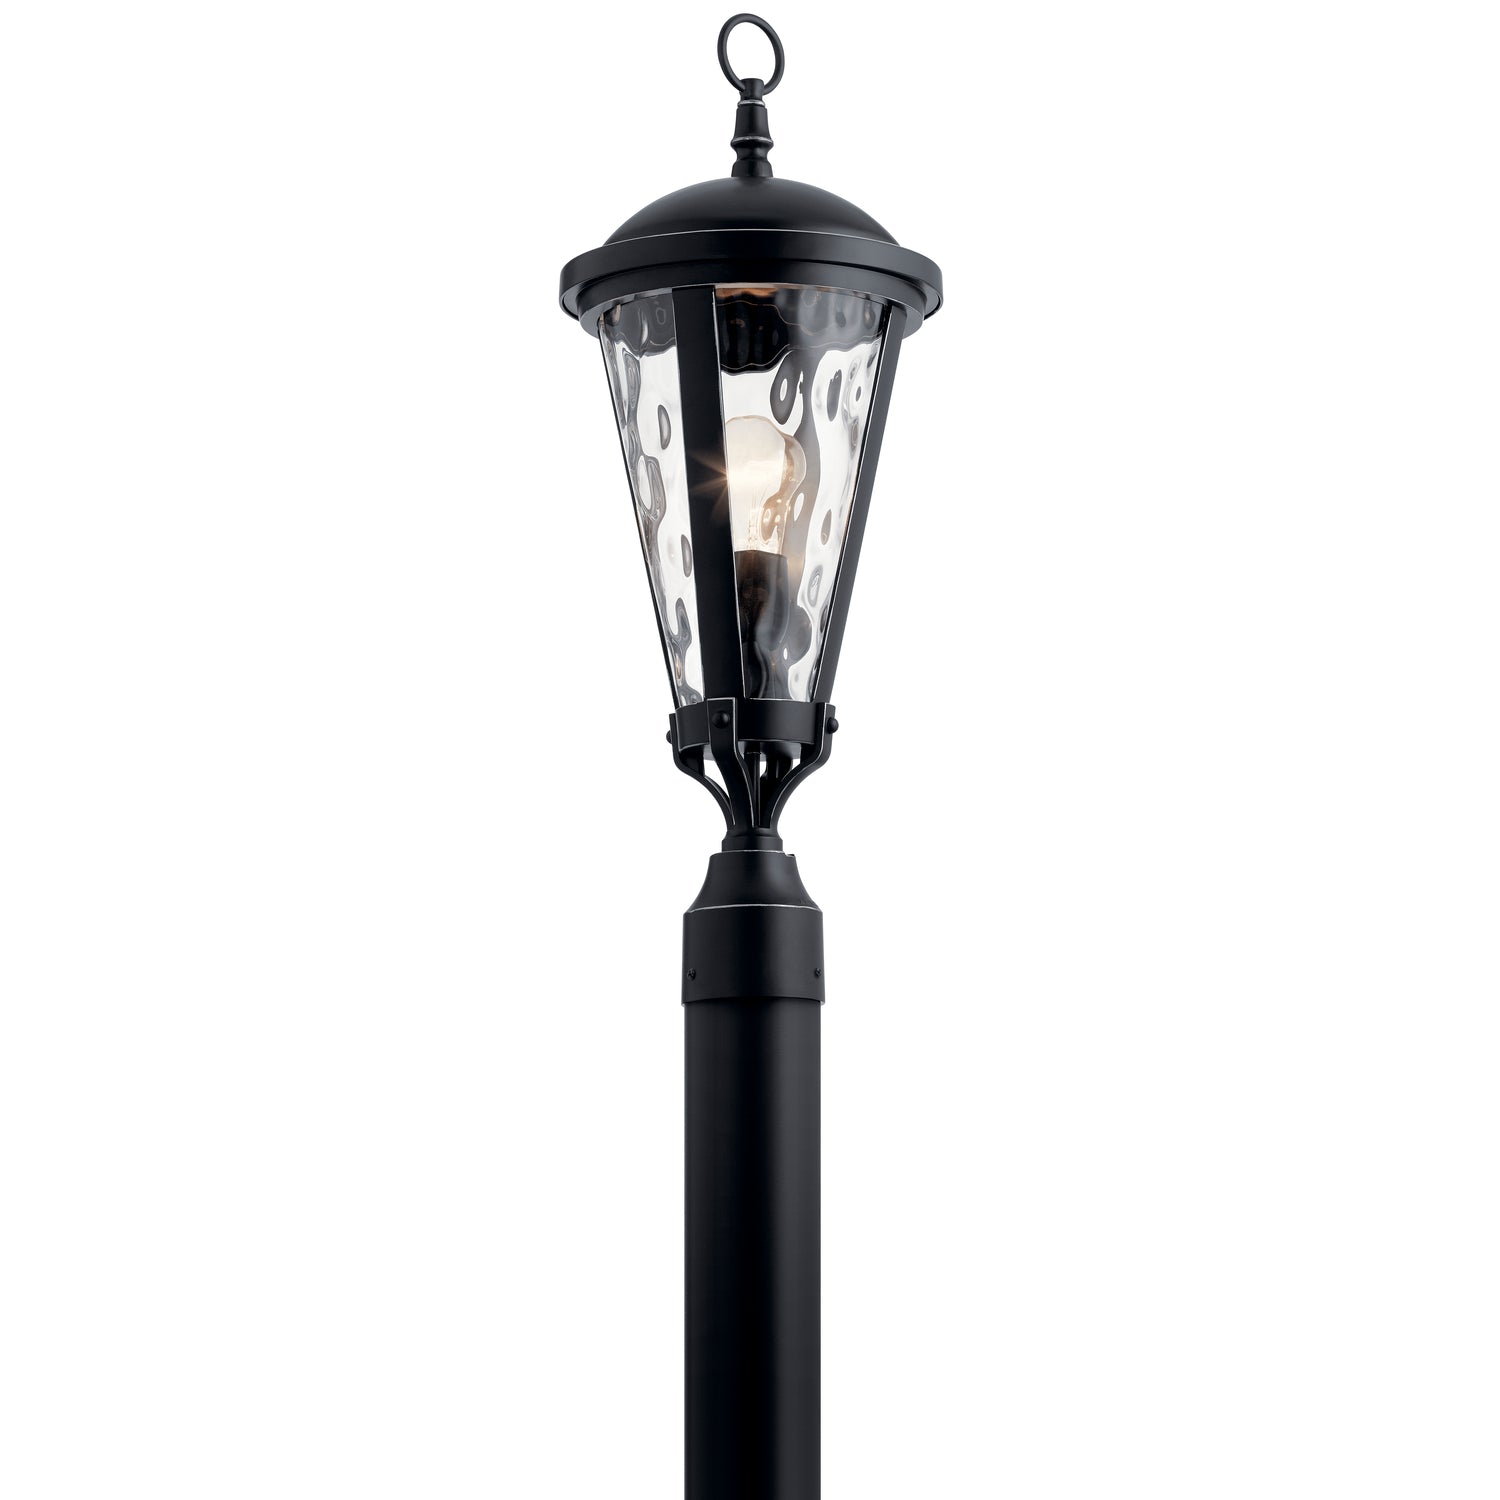 Cresleigh Post Light Black with Silver Highlights